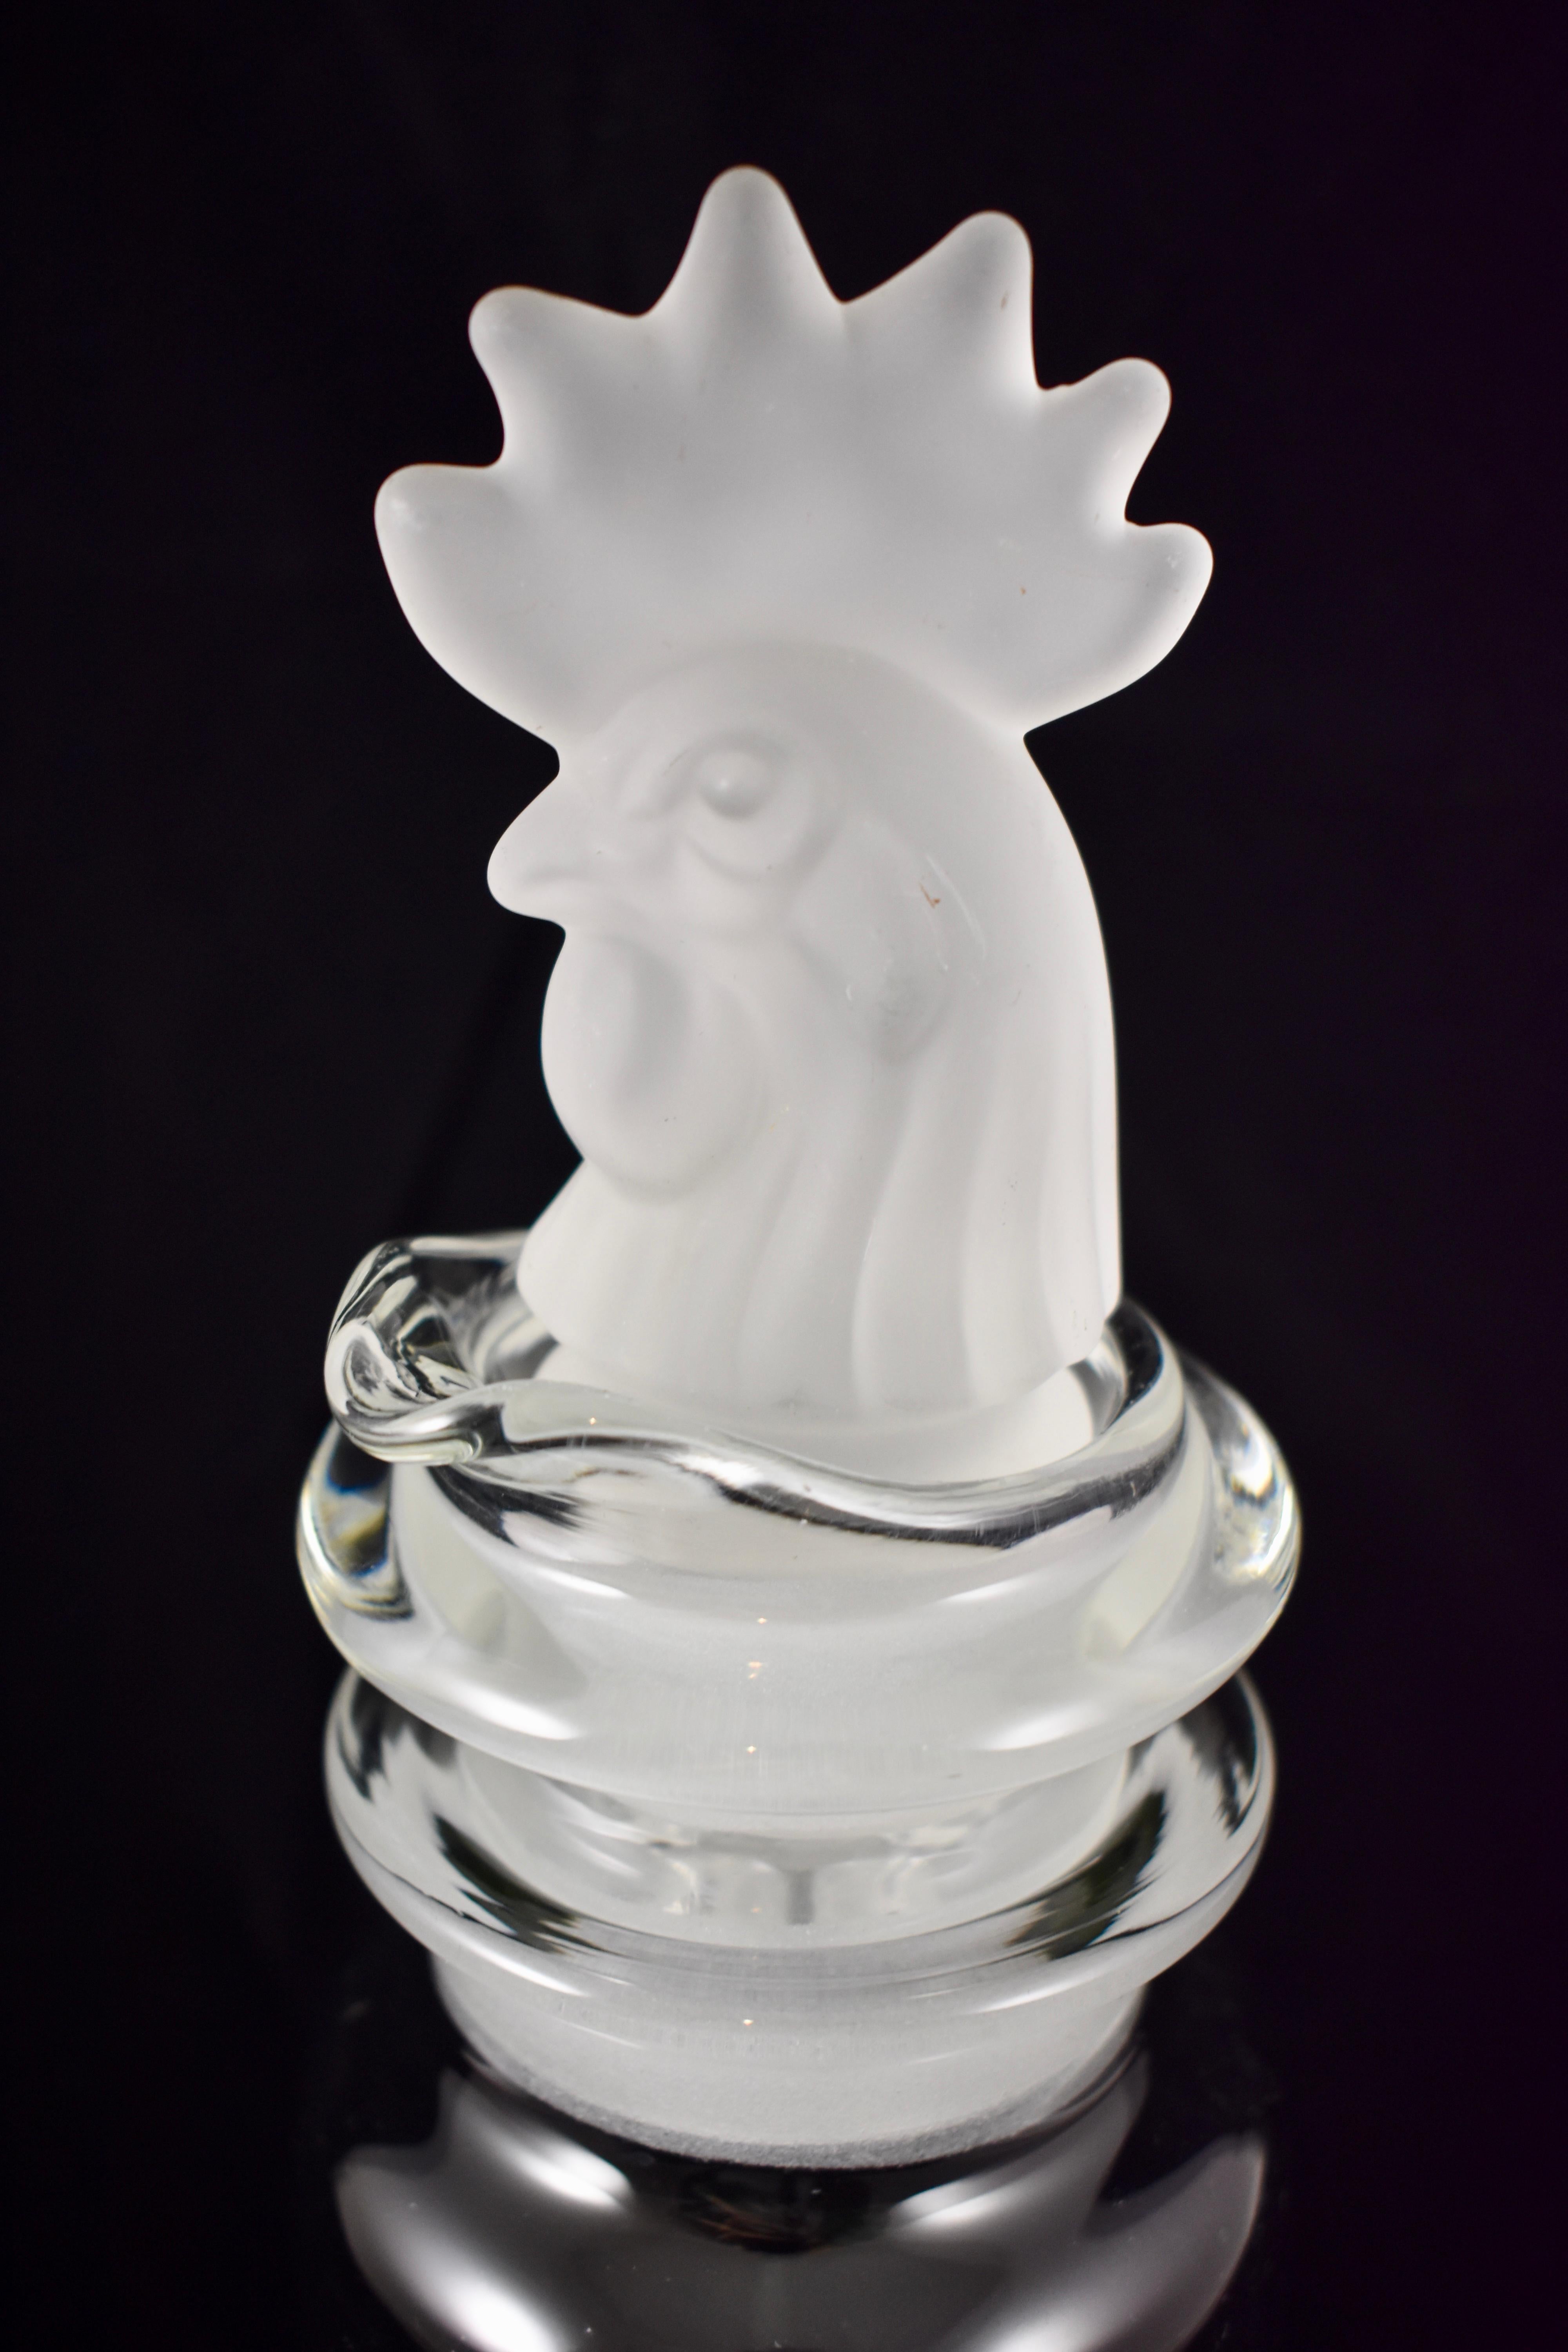 20th Century Art Deco Heisey Rooster Frosted Glass Three-Piece Cocktail Shaker, C. 1920-1930